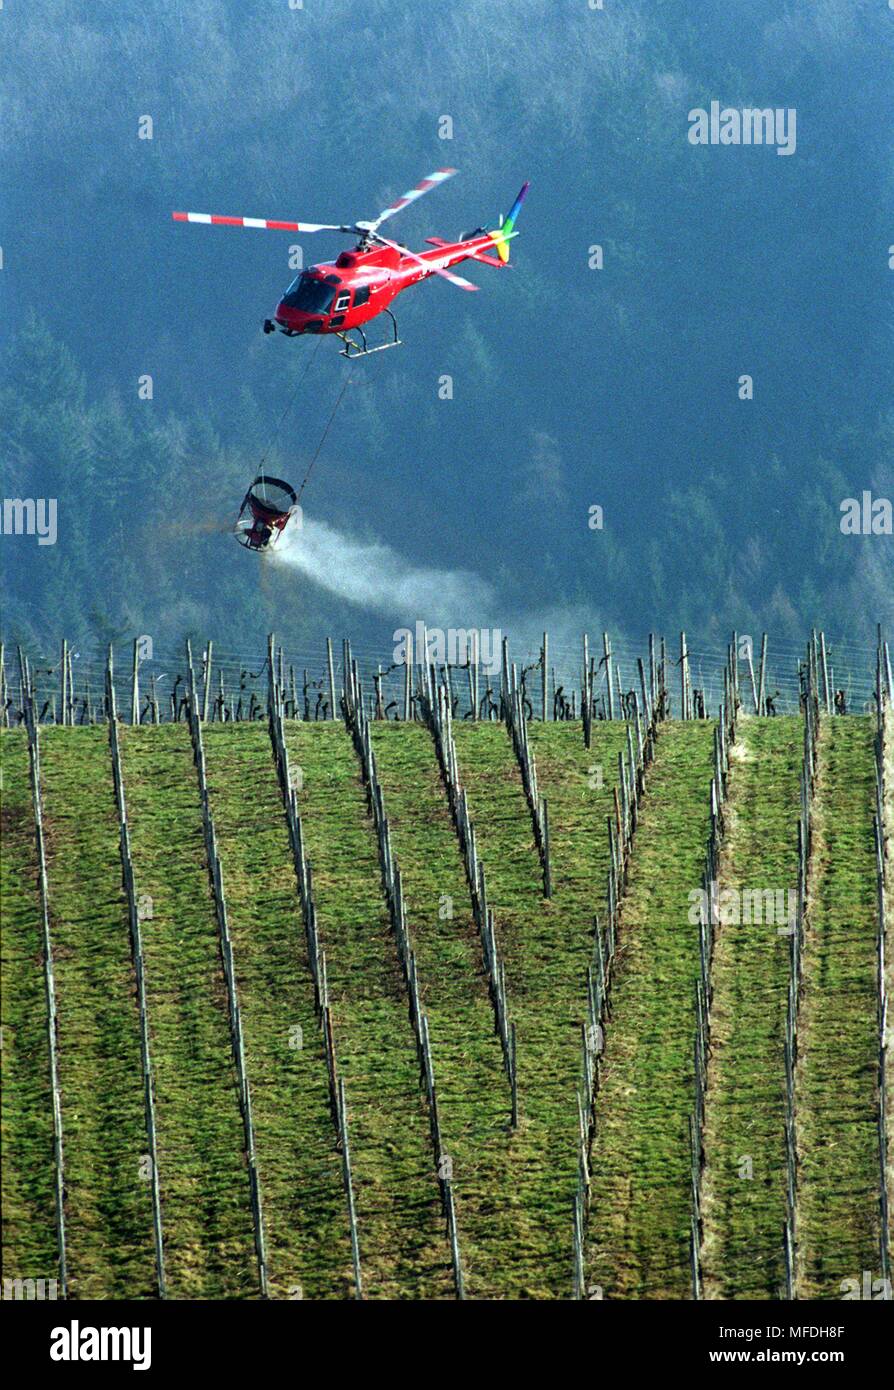 The vineyards of the Baden wine village Buchholz im Breisgau will be hanged on 28.2.96 by helicopter. The product is a granulate made up of the nutrient components lime, magnesium, boron and potash. After several years, the forests in Baden-Wurttemberg have been successfully chalked by helicopter. Now, aerial fertilization is also applied to agricultural flaughs. | usage worldwide Stock Photo